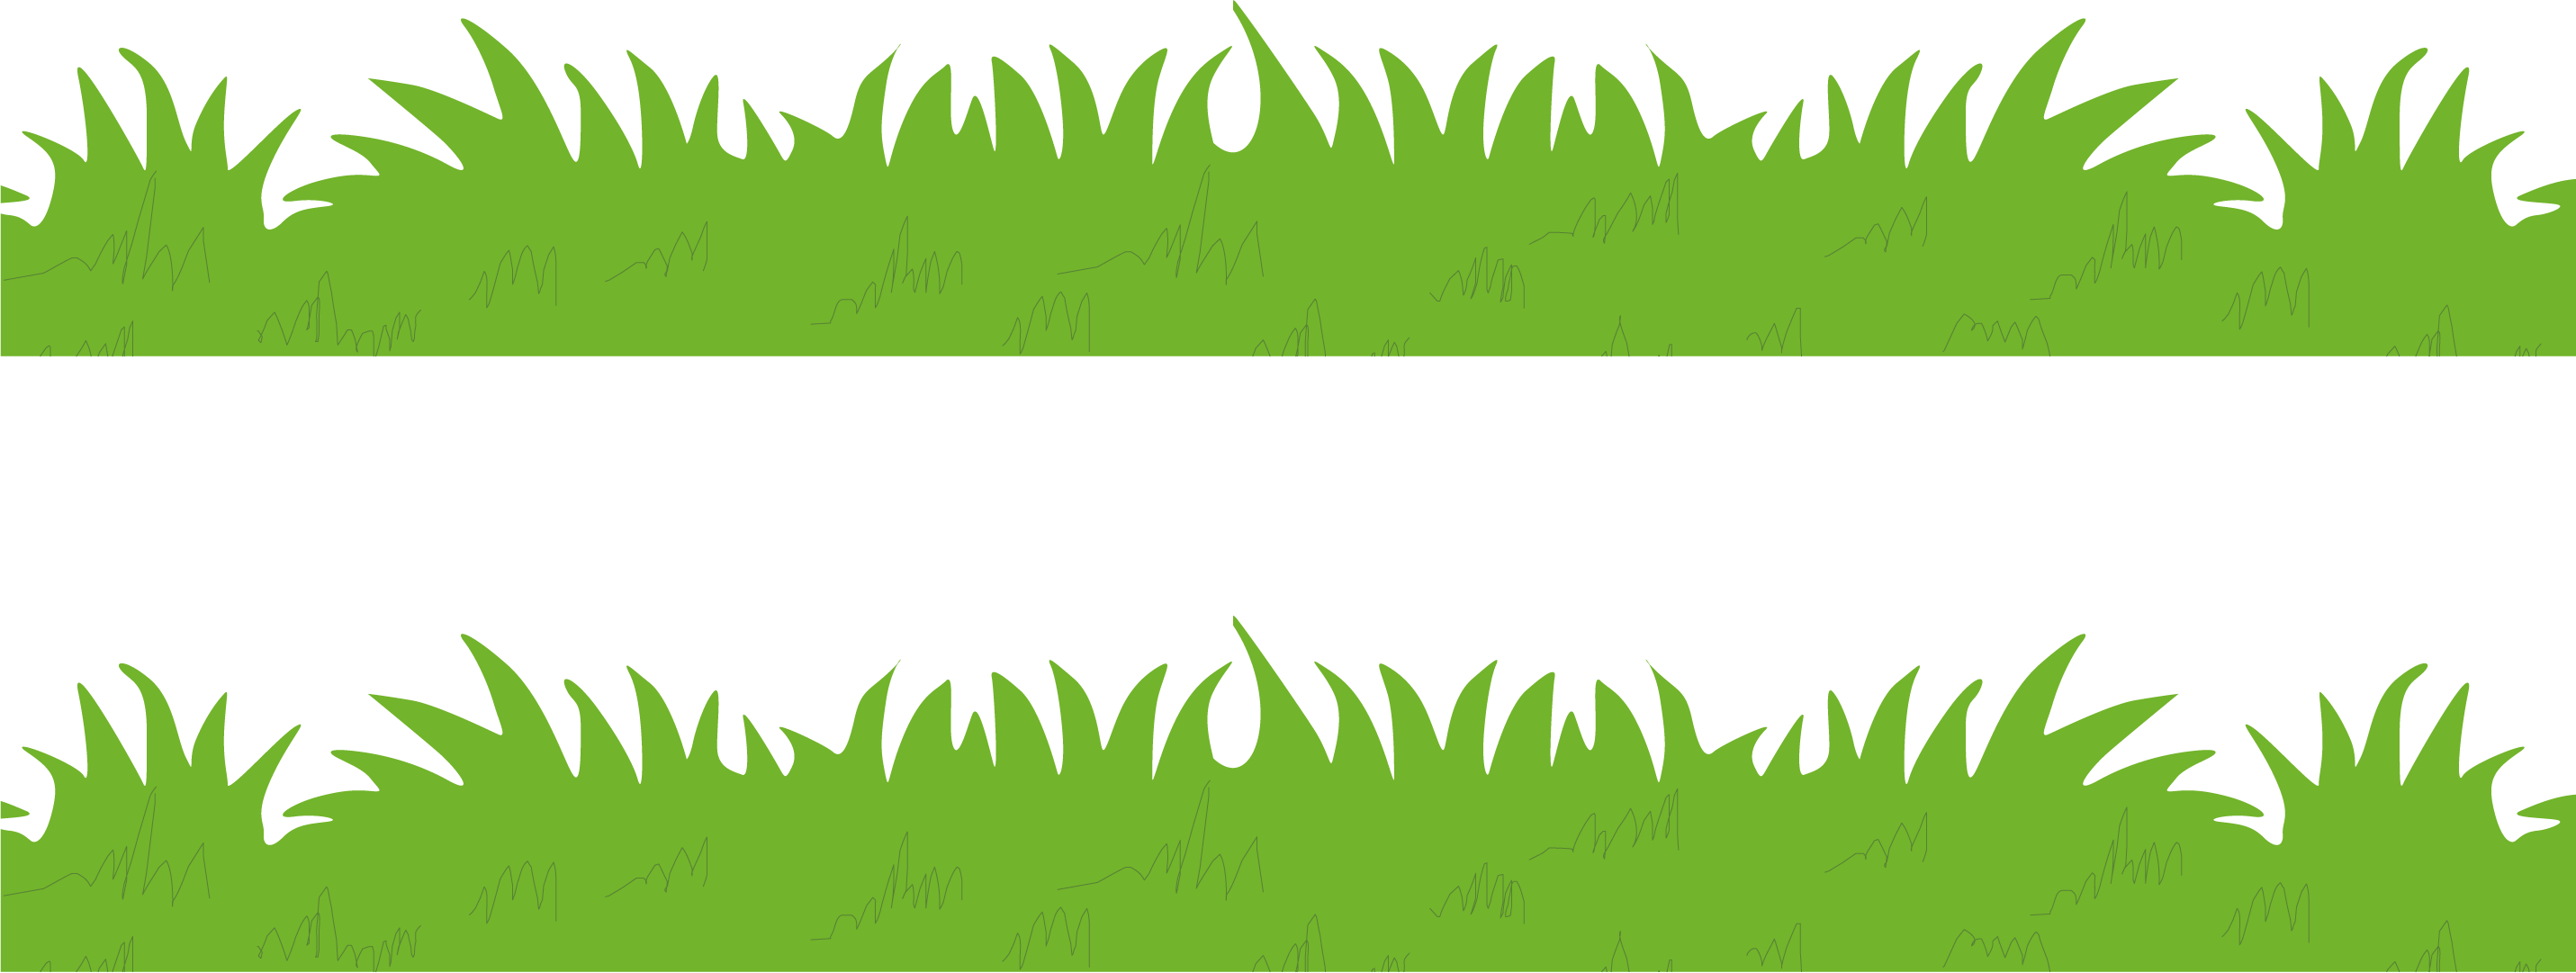 Vector Grass Gis Element HQ Image Free PNG Clipart